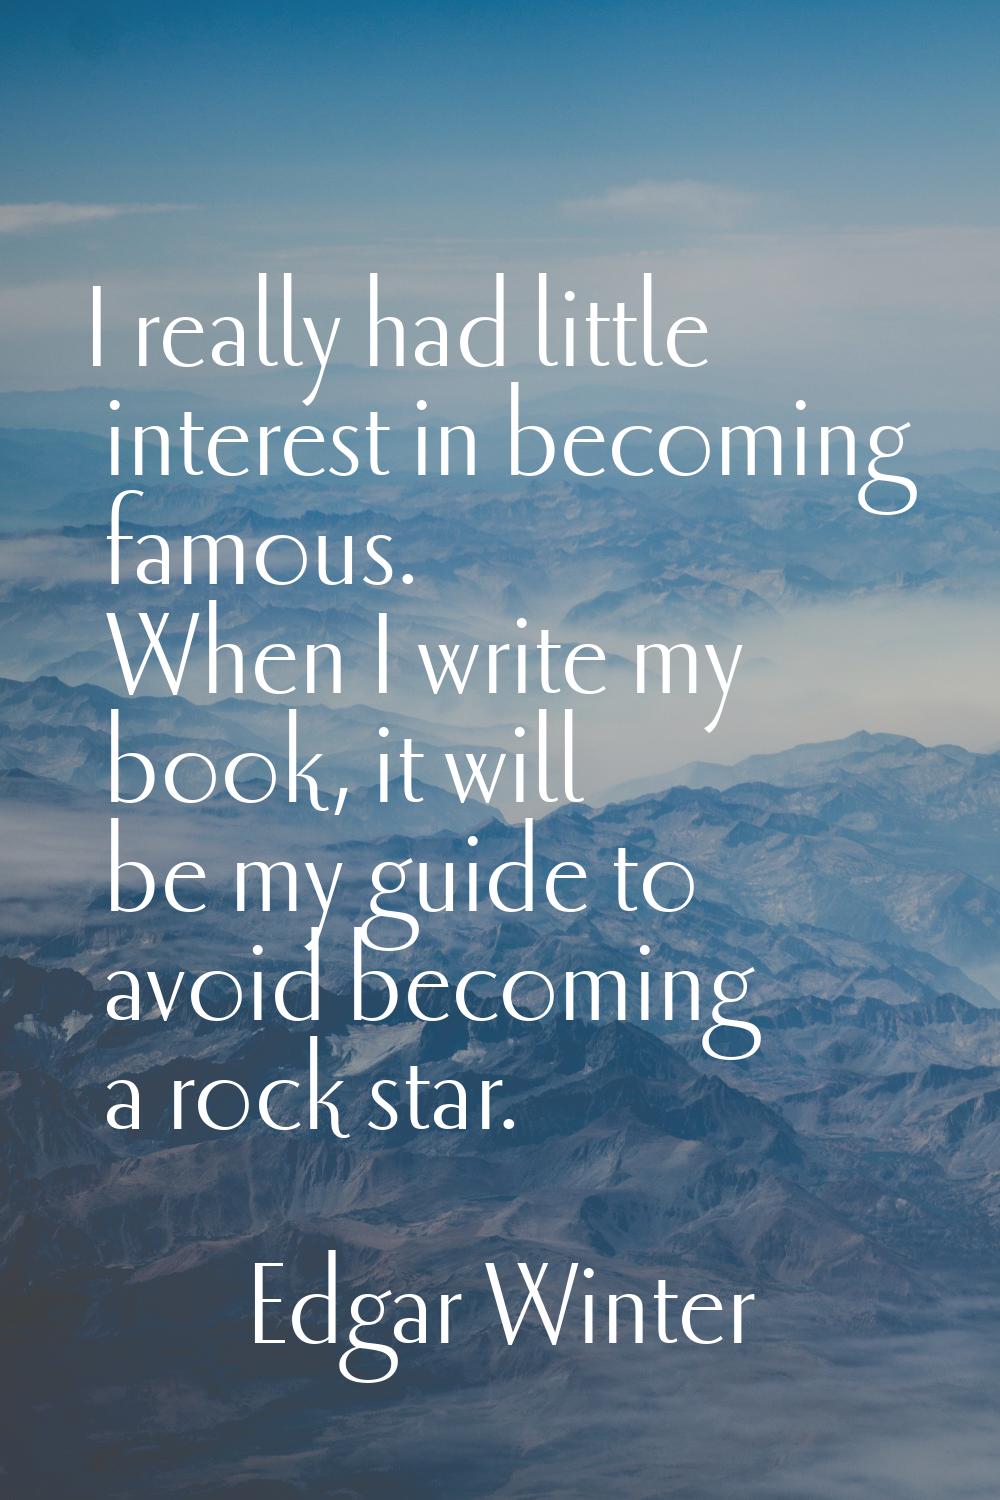 I really had little interest in becoming famous. When I write my book, it will be my guide to avoid